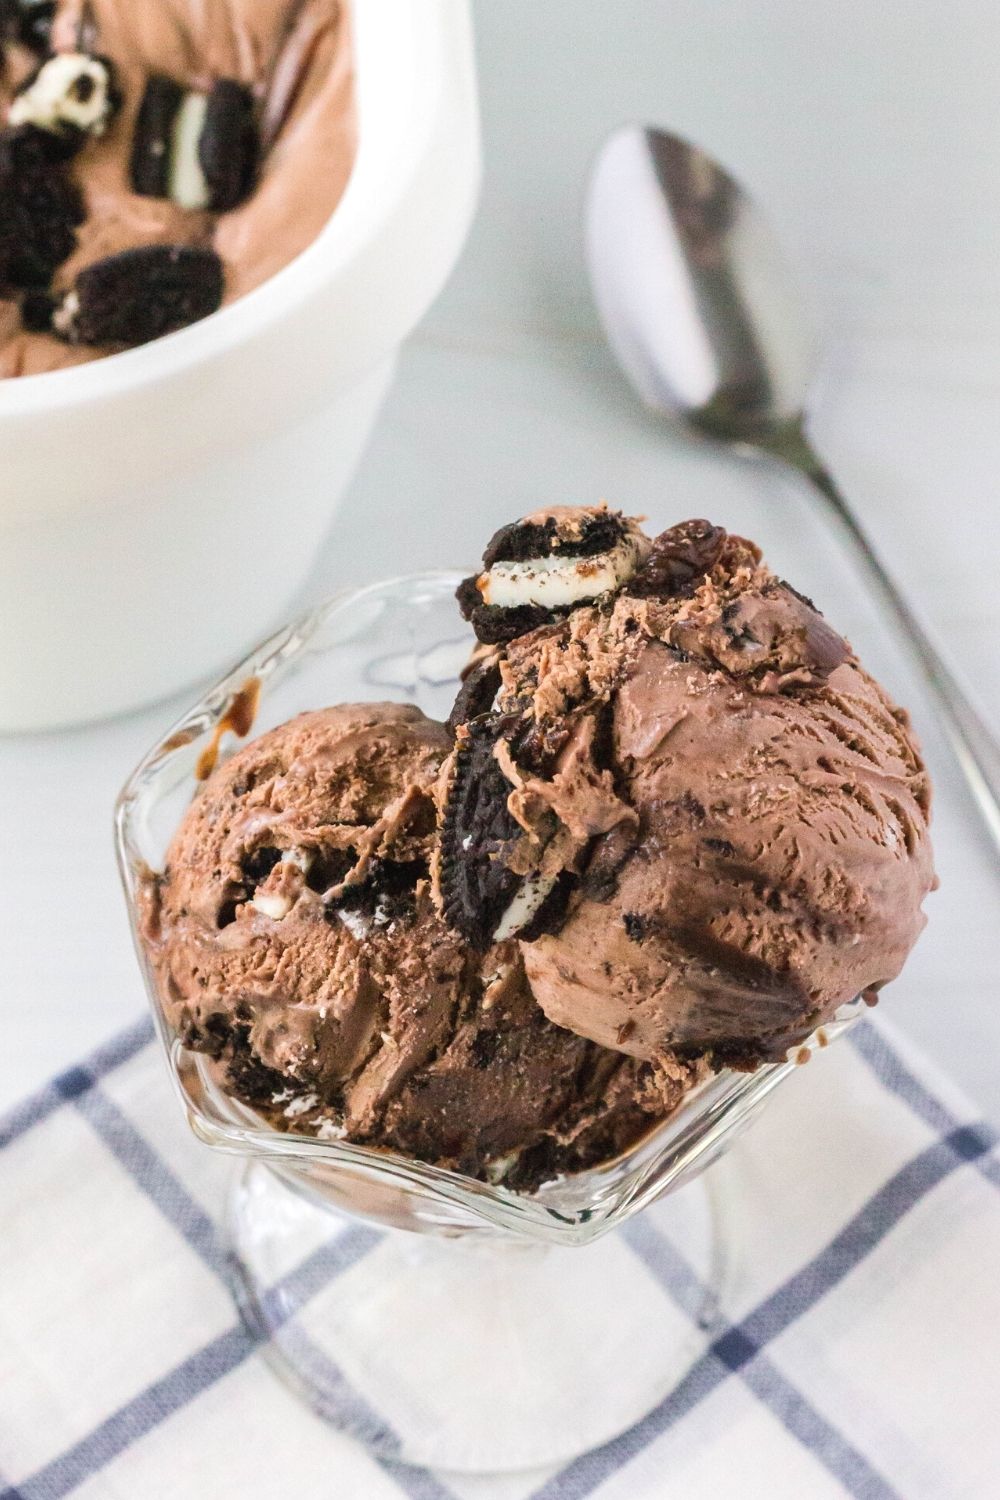 an ice cream dish serves scoops of mississippi mud pie ice cream made from a no-churn recipe